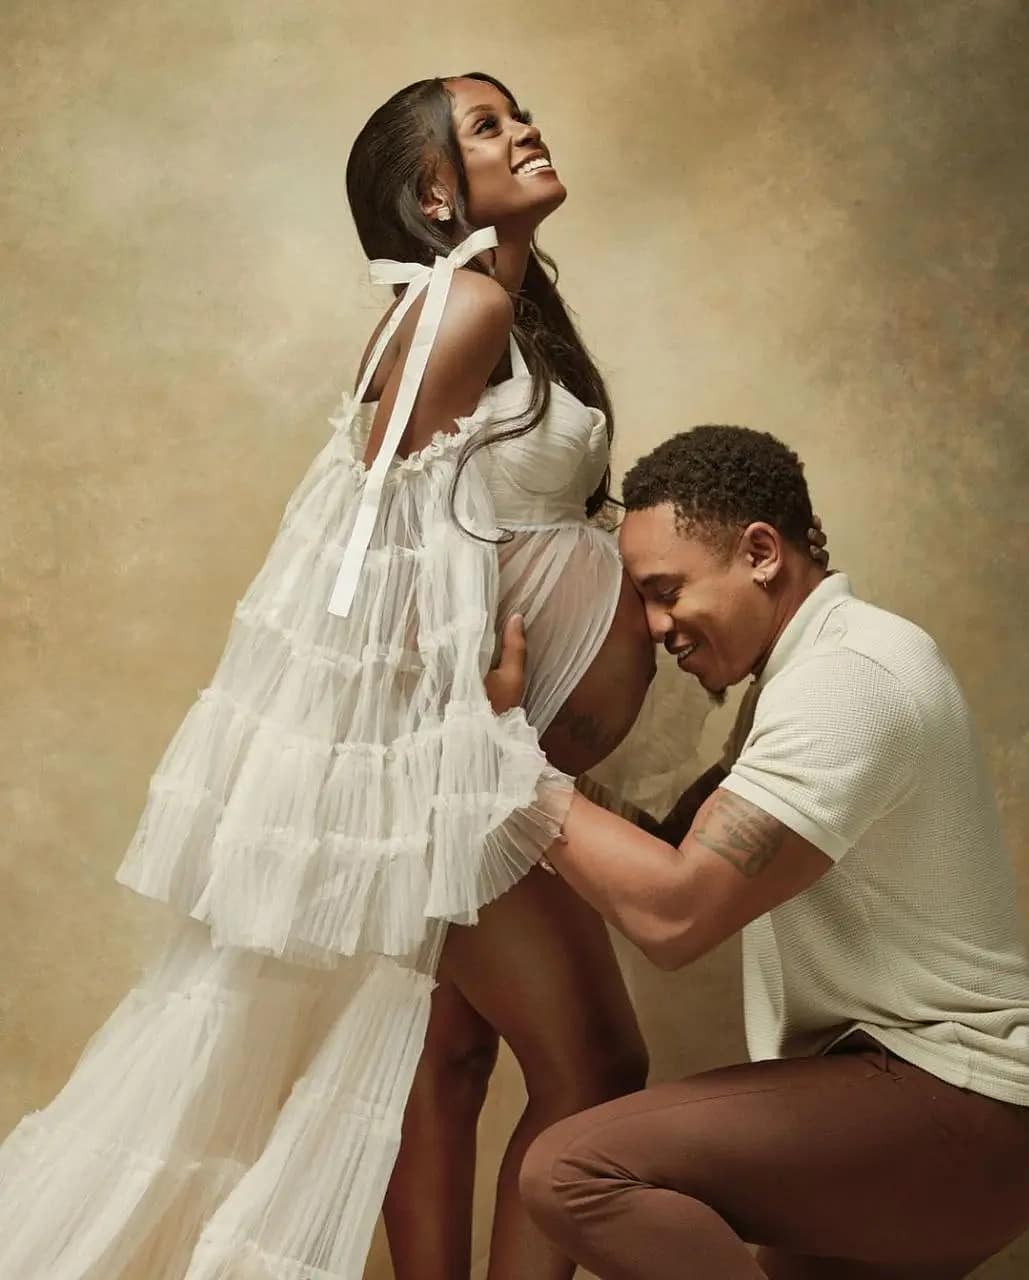 Singer Rotimi Expecting Second Child With Tanzania Wife Vanessa Mdee